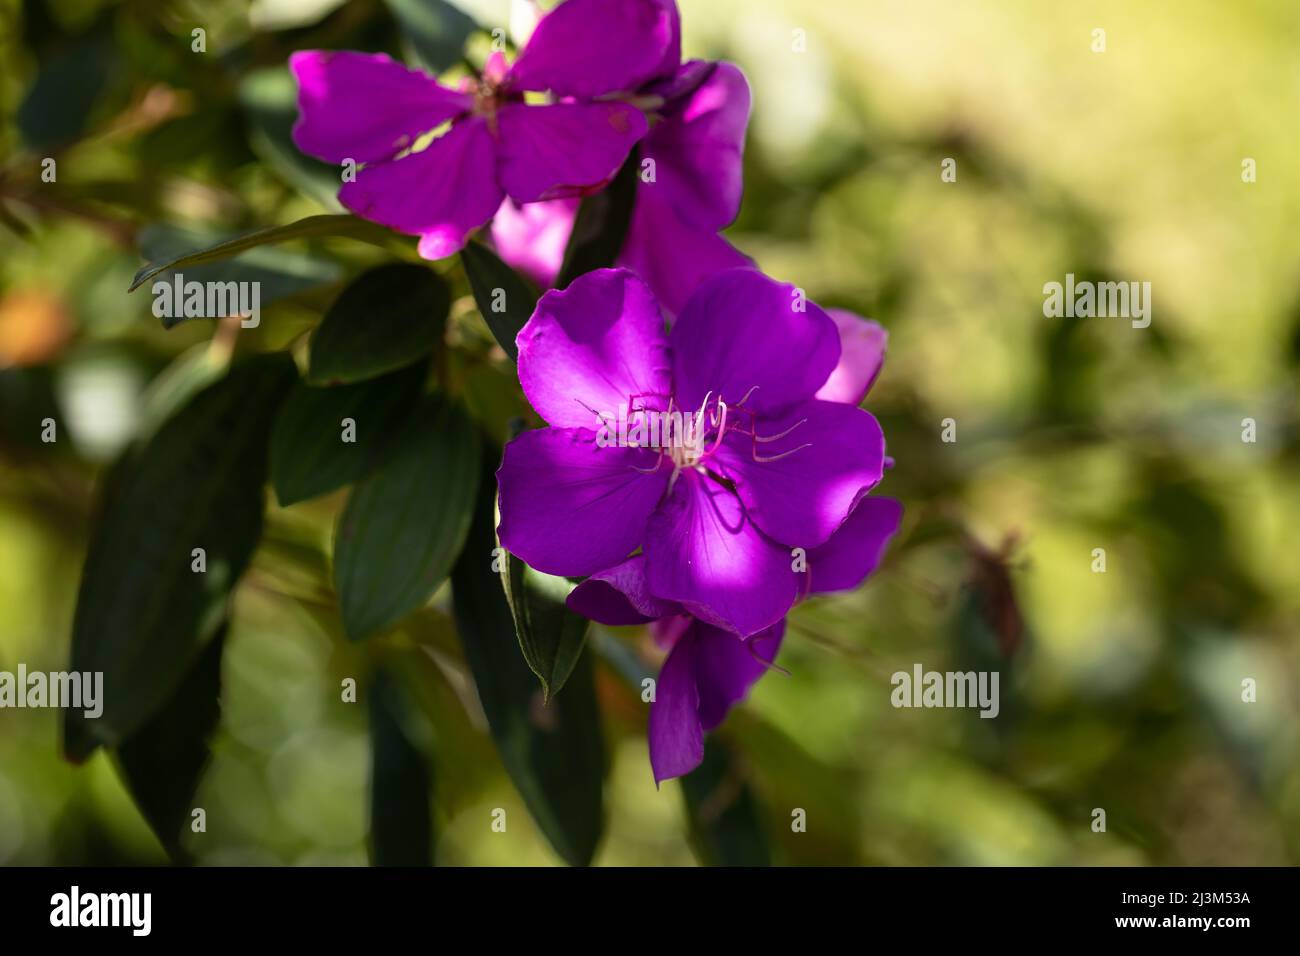 Tibouchina semidecandra, Glory Bush in tropical garden bathed in afternoon light Stock Photo